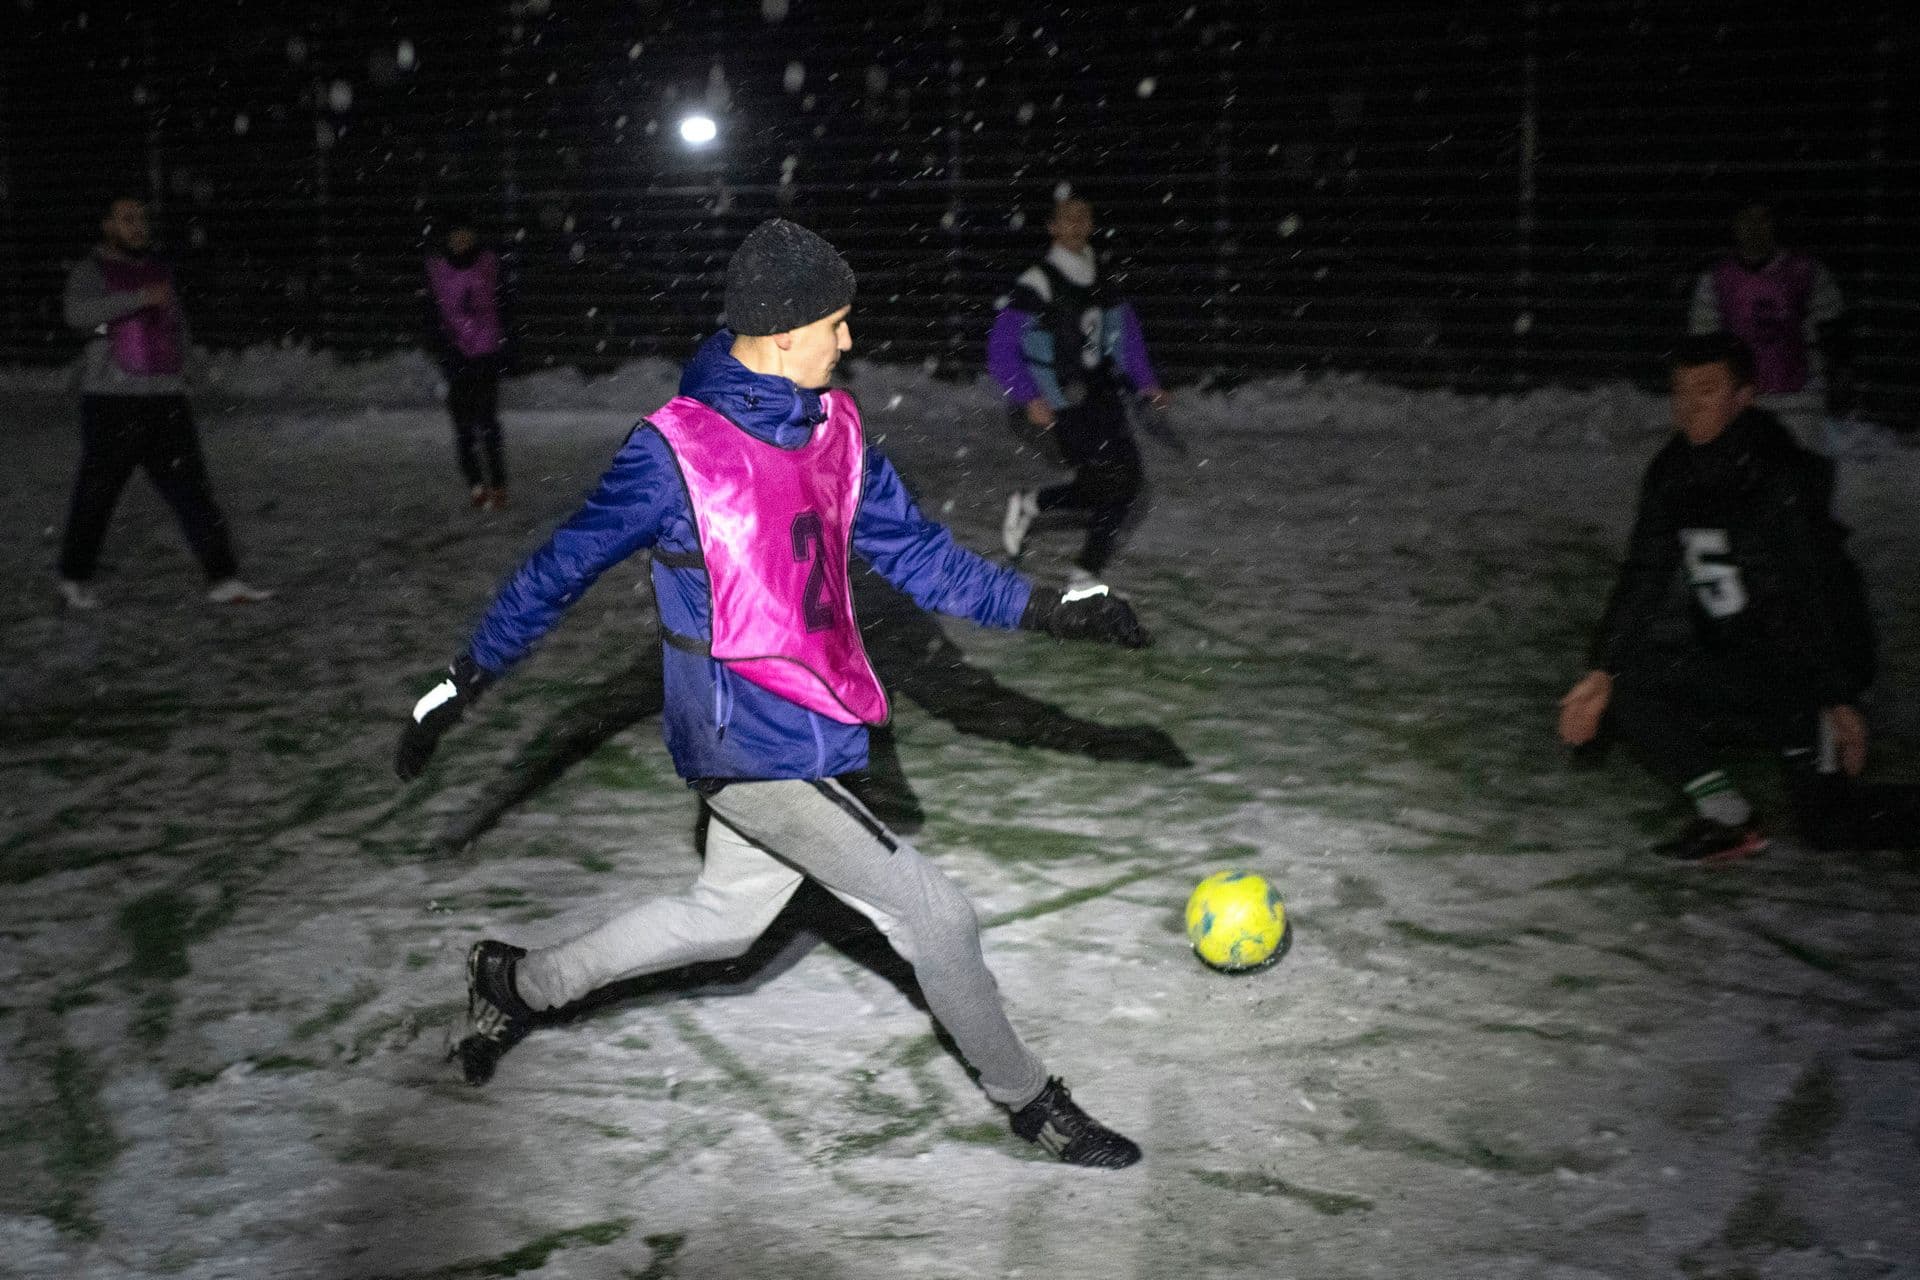 Men take part in a soccer game during a blackout in Irpin